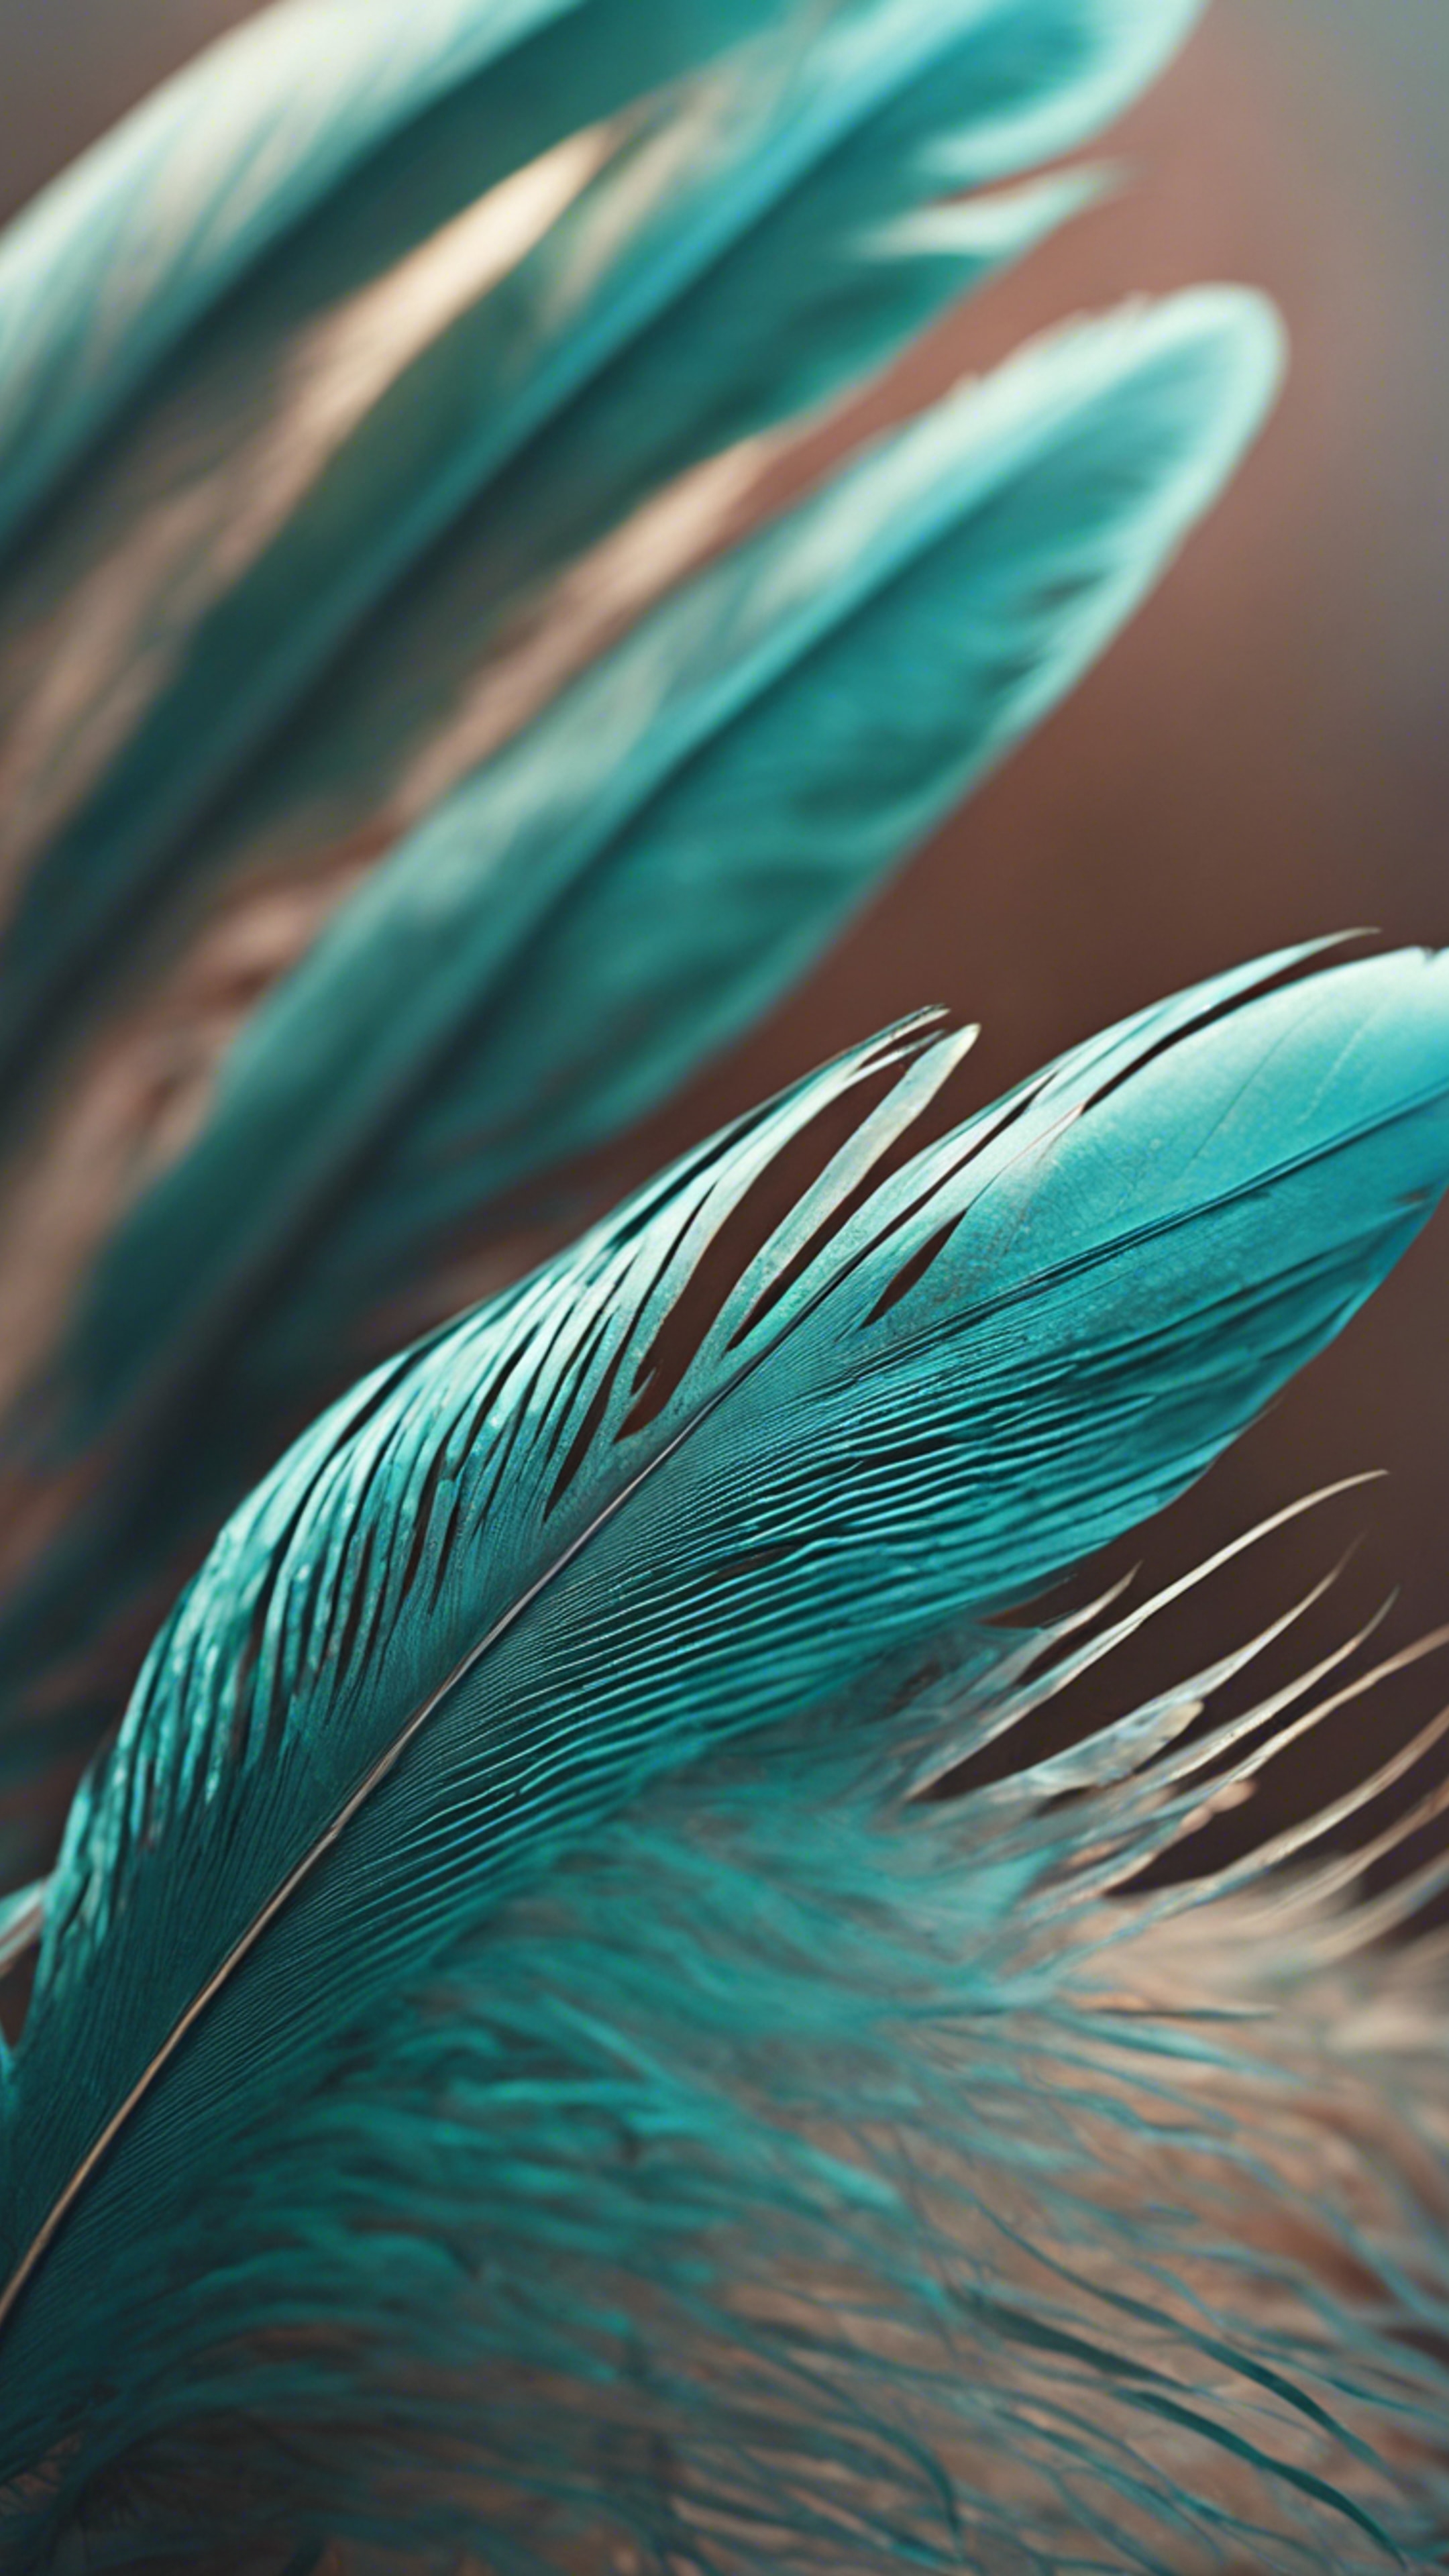 A close-up view of an exotic cool teal-colored birds' feather. Tapet[44d0beeee9f542d4ae1e]